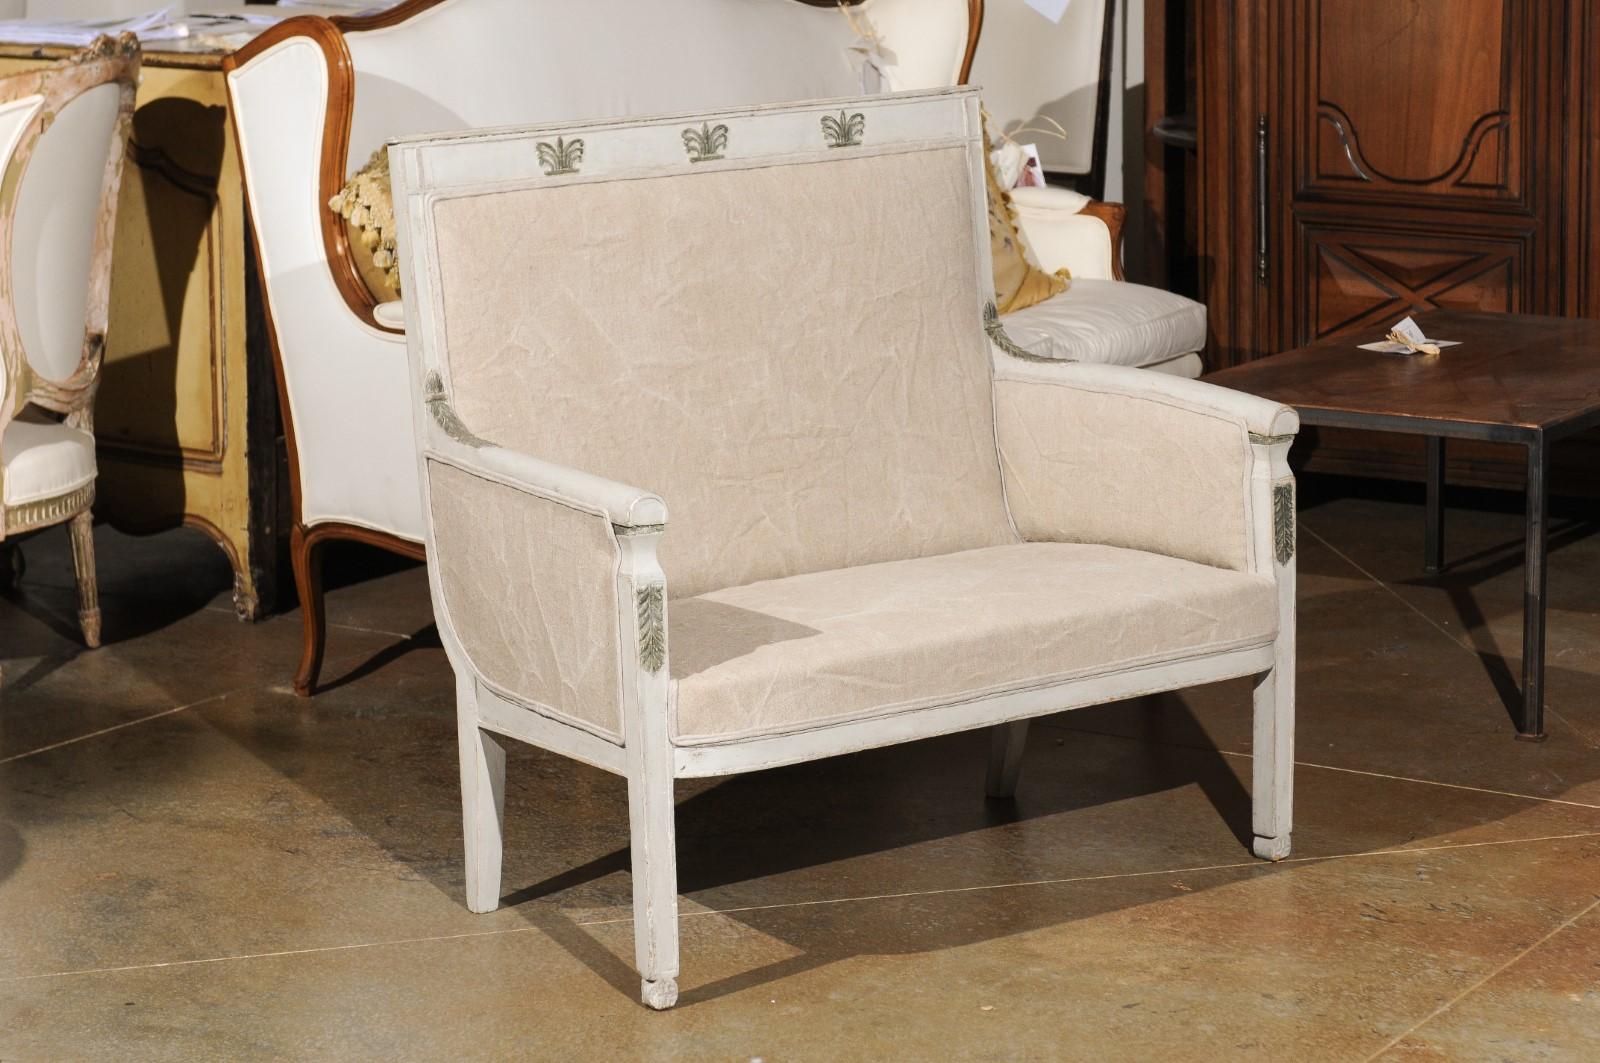 A French Empire style painted wood marquise chair from the 19th century, with carved palmettes. Born in France during the politically dynamic 19th century, this French Empire style marquise features a rectangular upholstered back, accented with